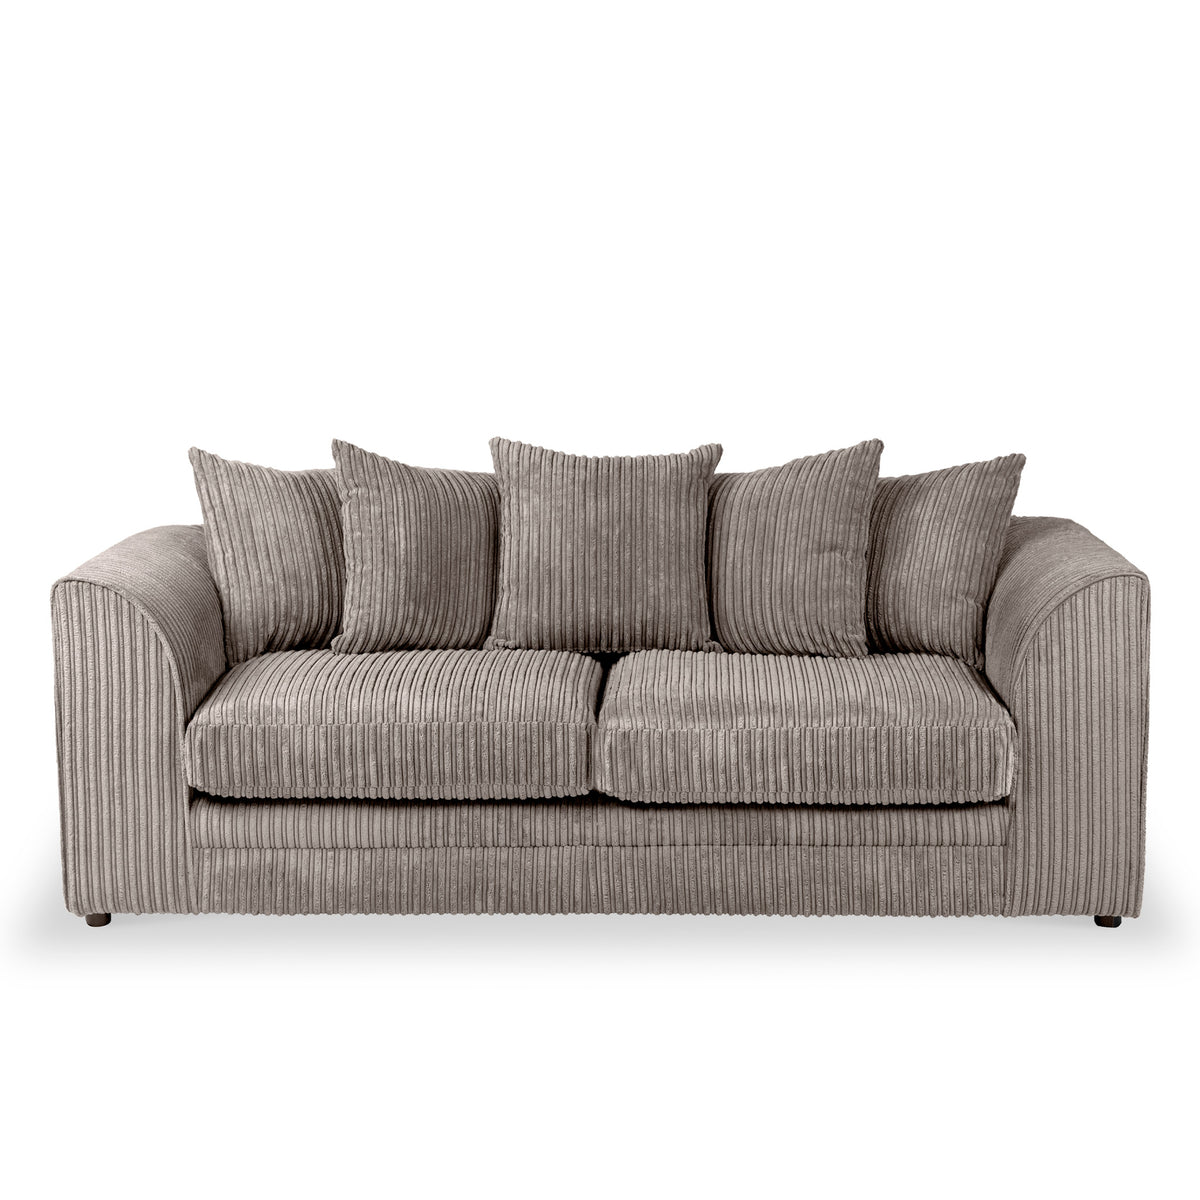 Bletchley Charcoal  Jumbo Cord 3 Seater Sofa from Roseland Furniture